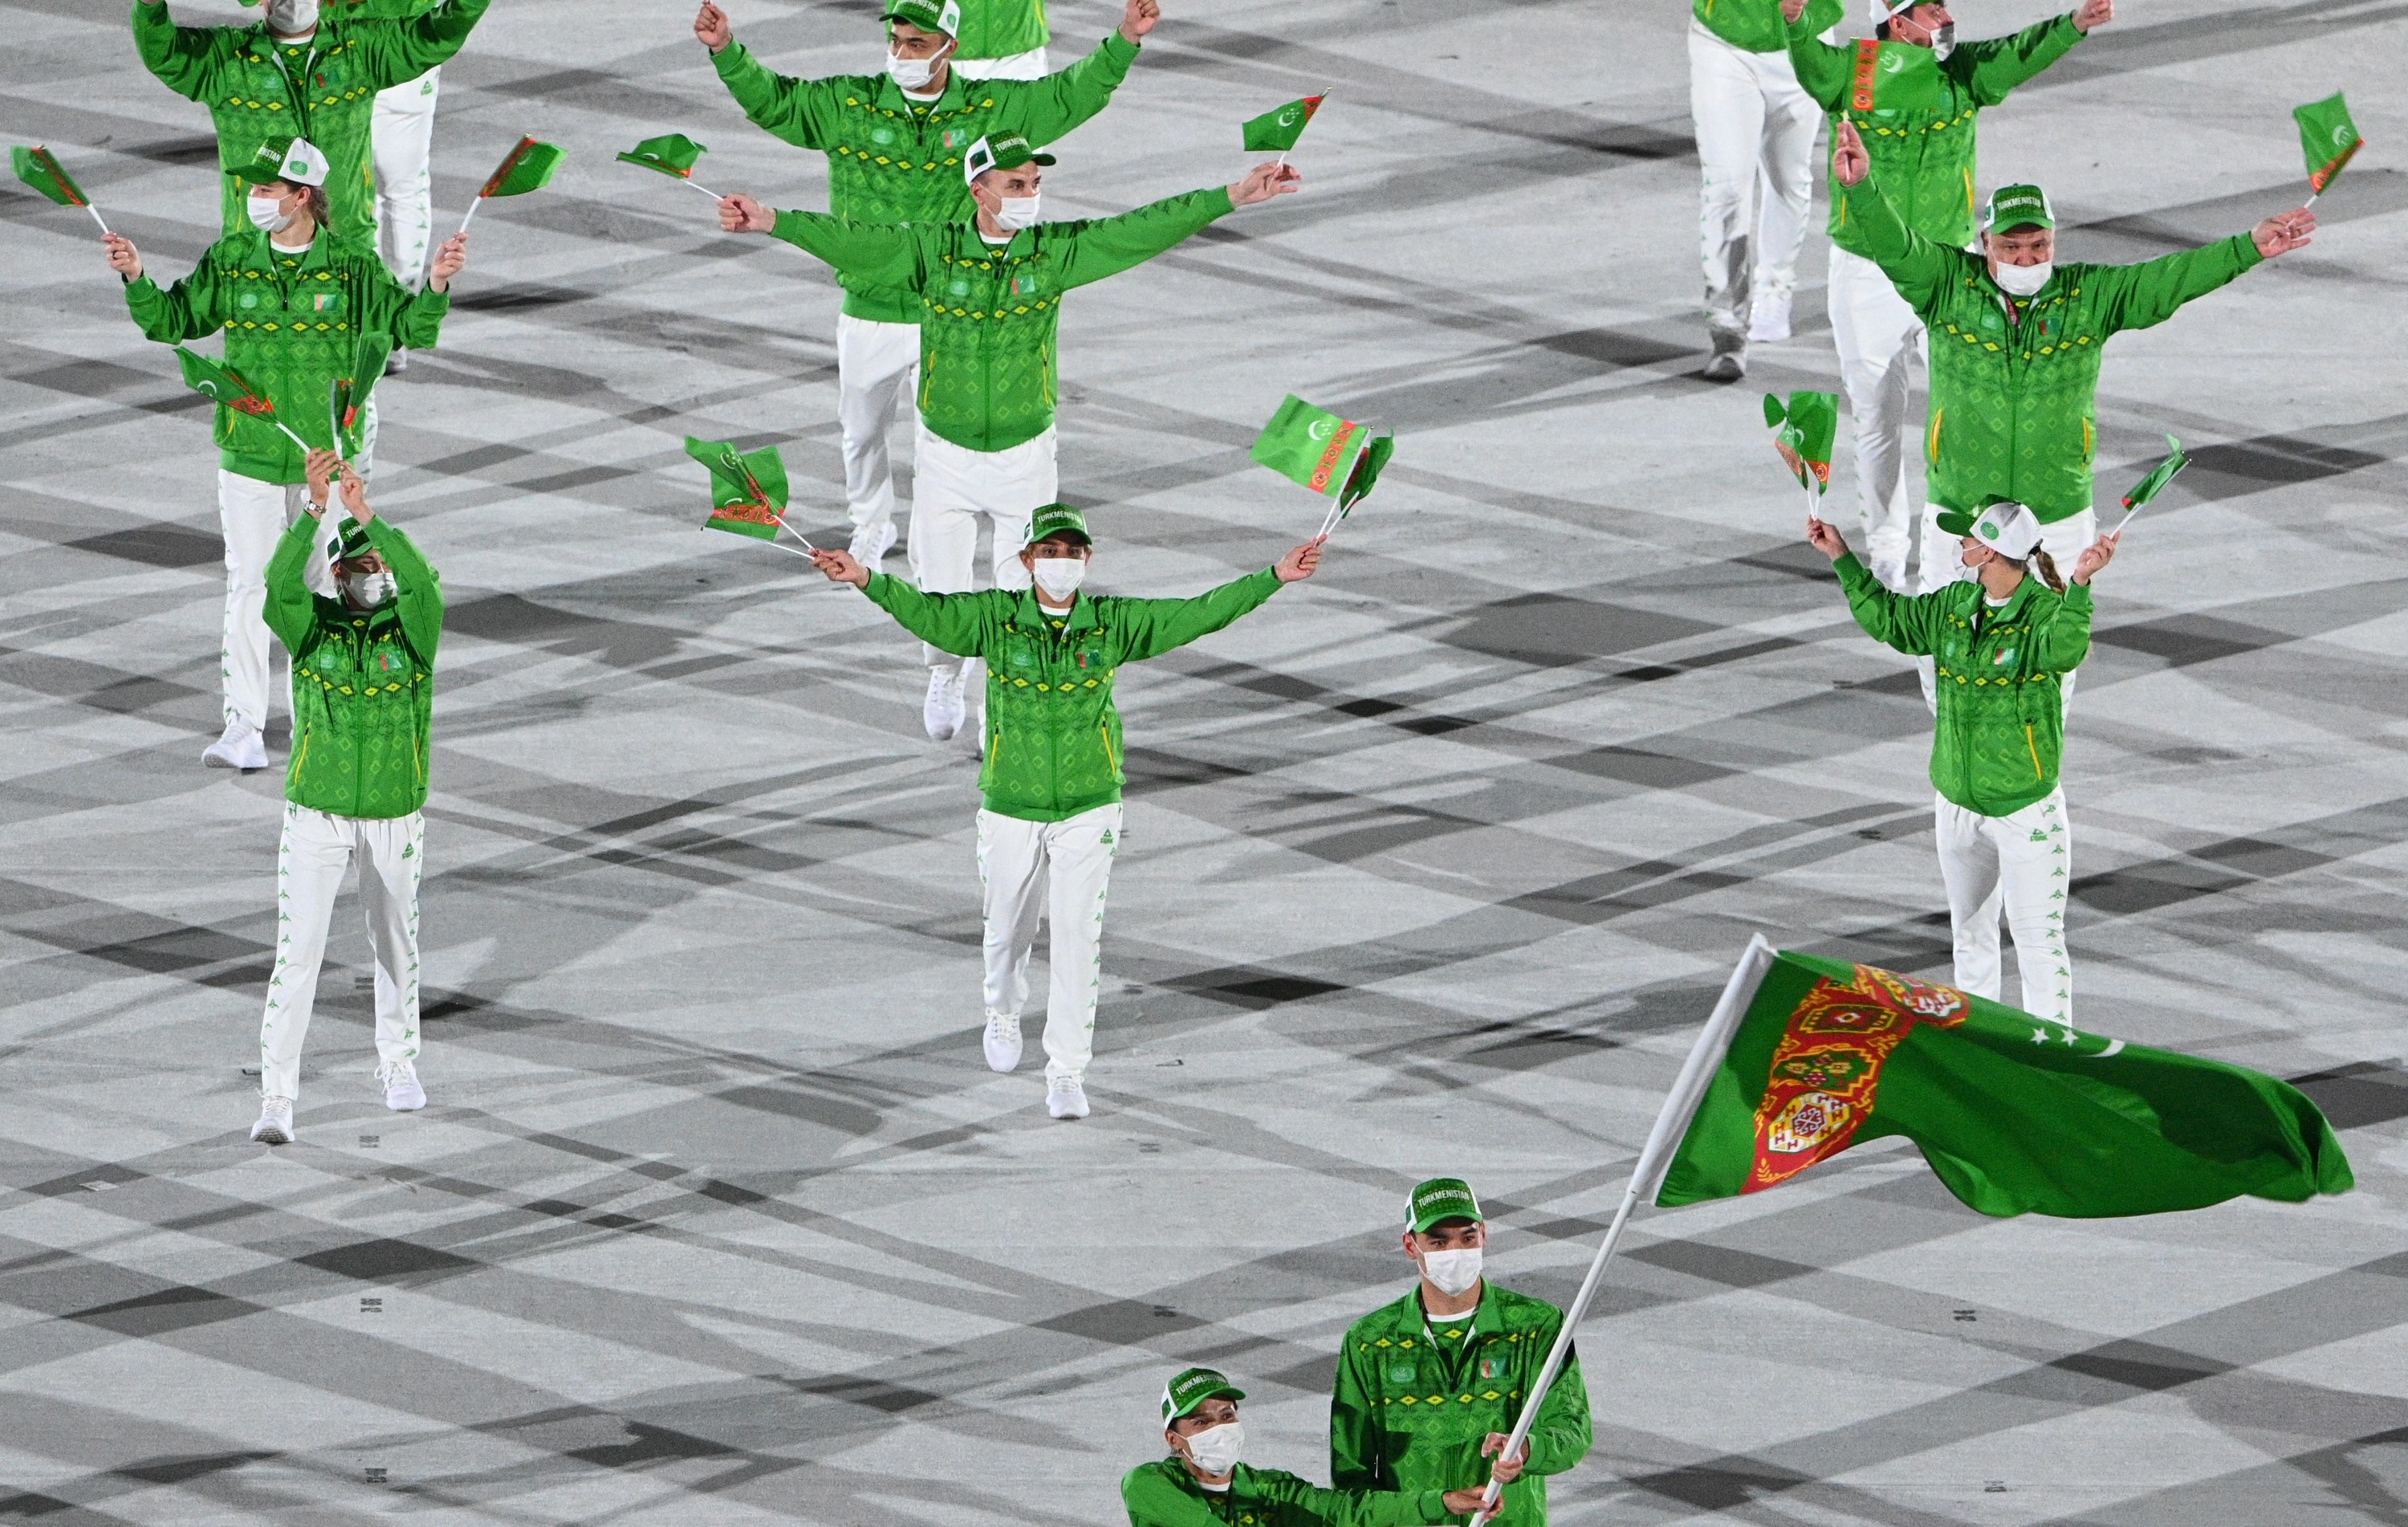 The athletes wore tracksuits to match their flag